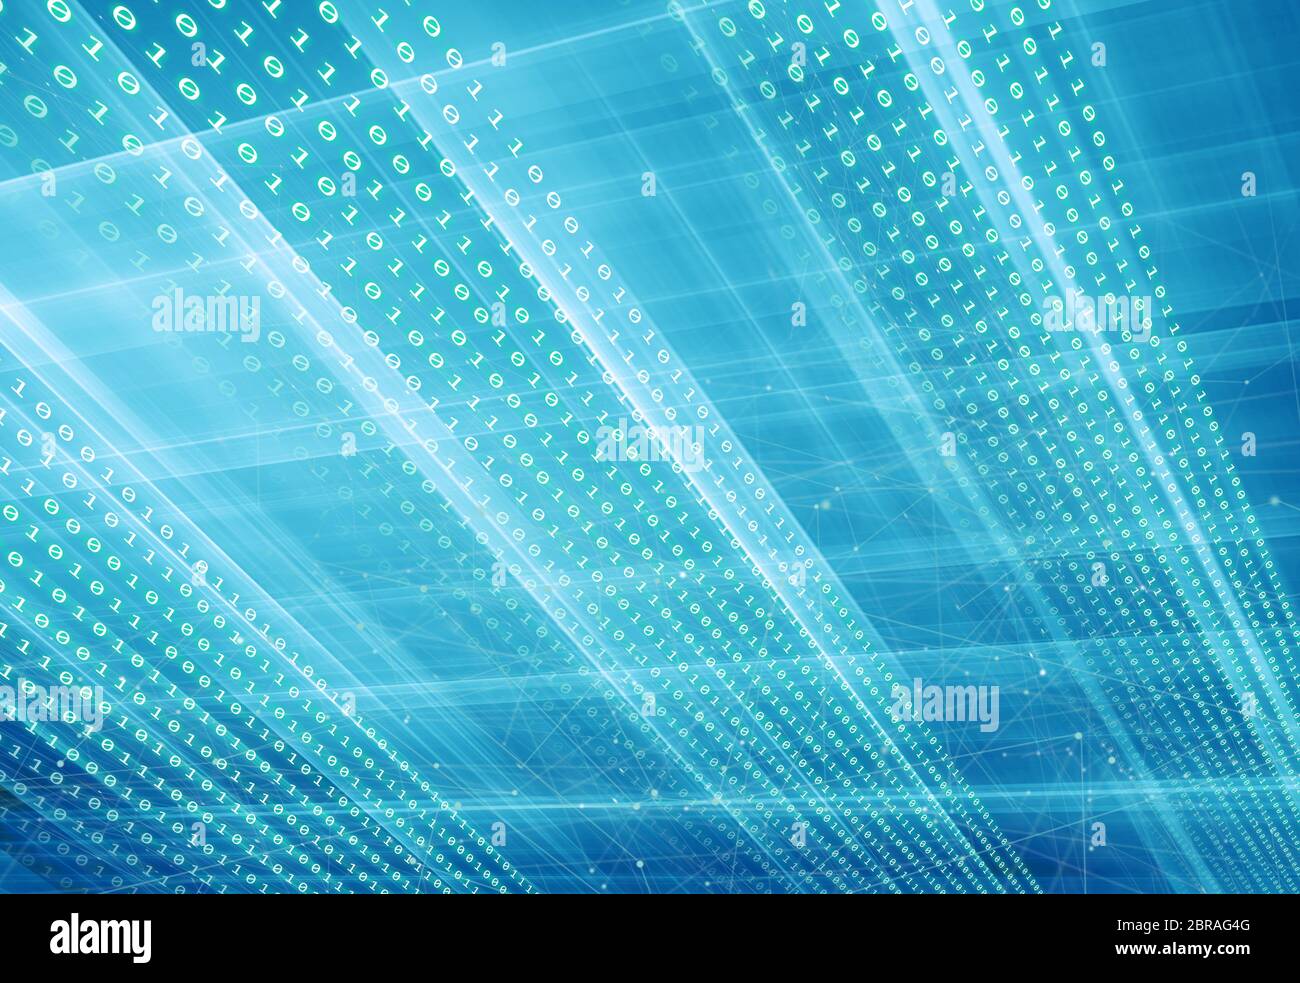 Multiple rows of digital binary codes blue theme background. Digital technology concept with connection lines. Stock Photo